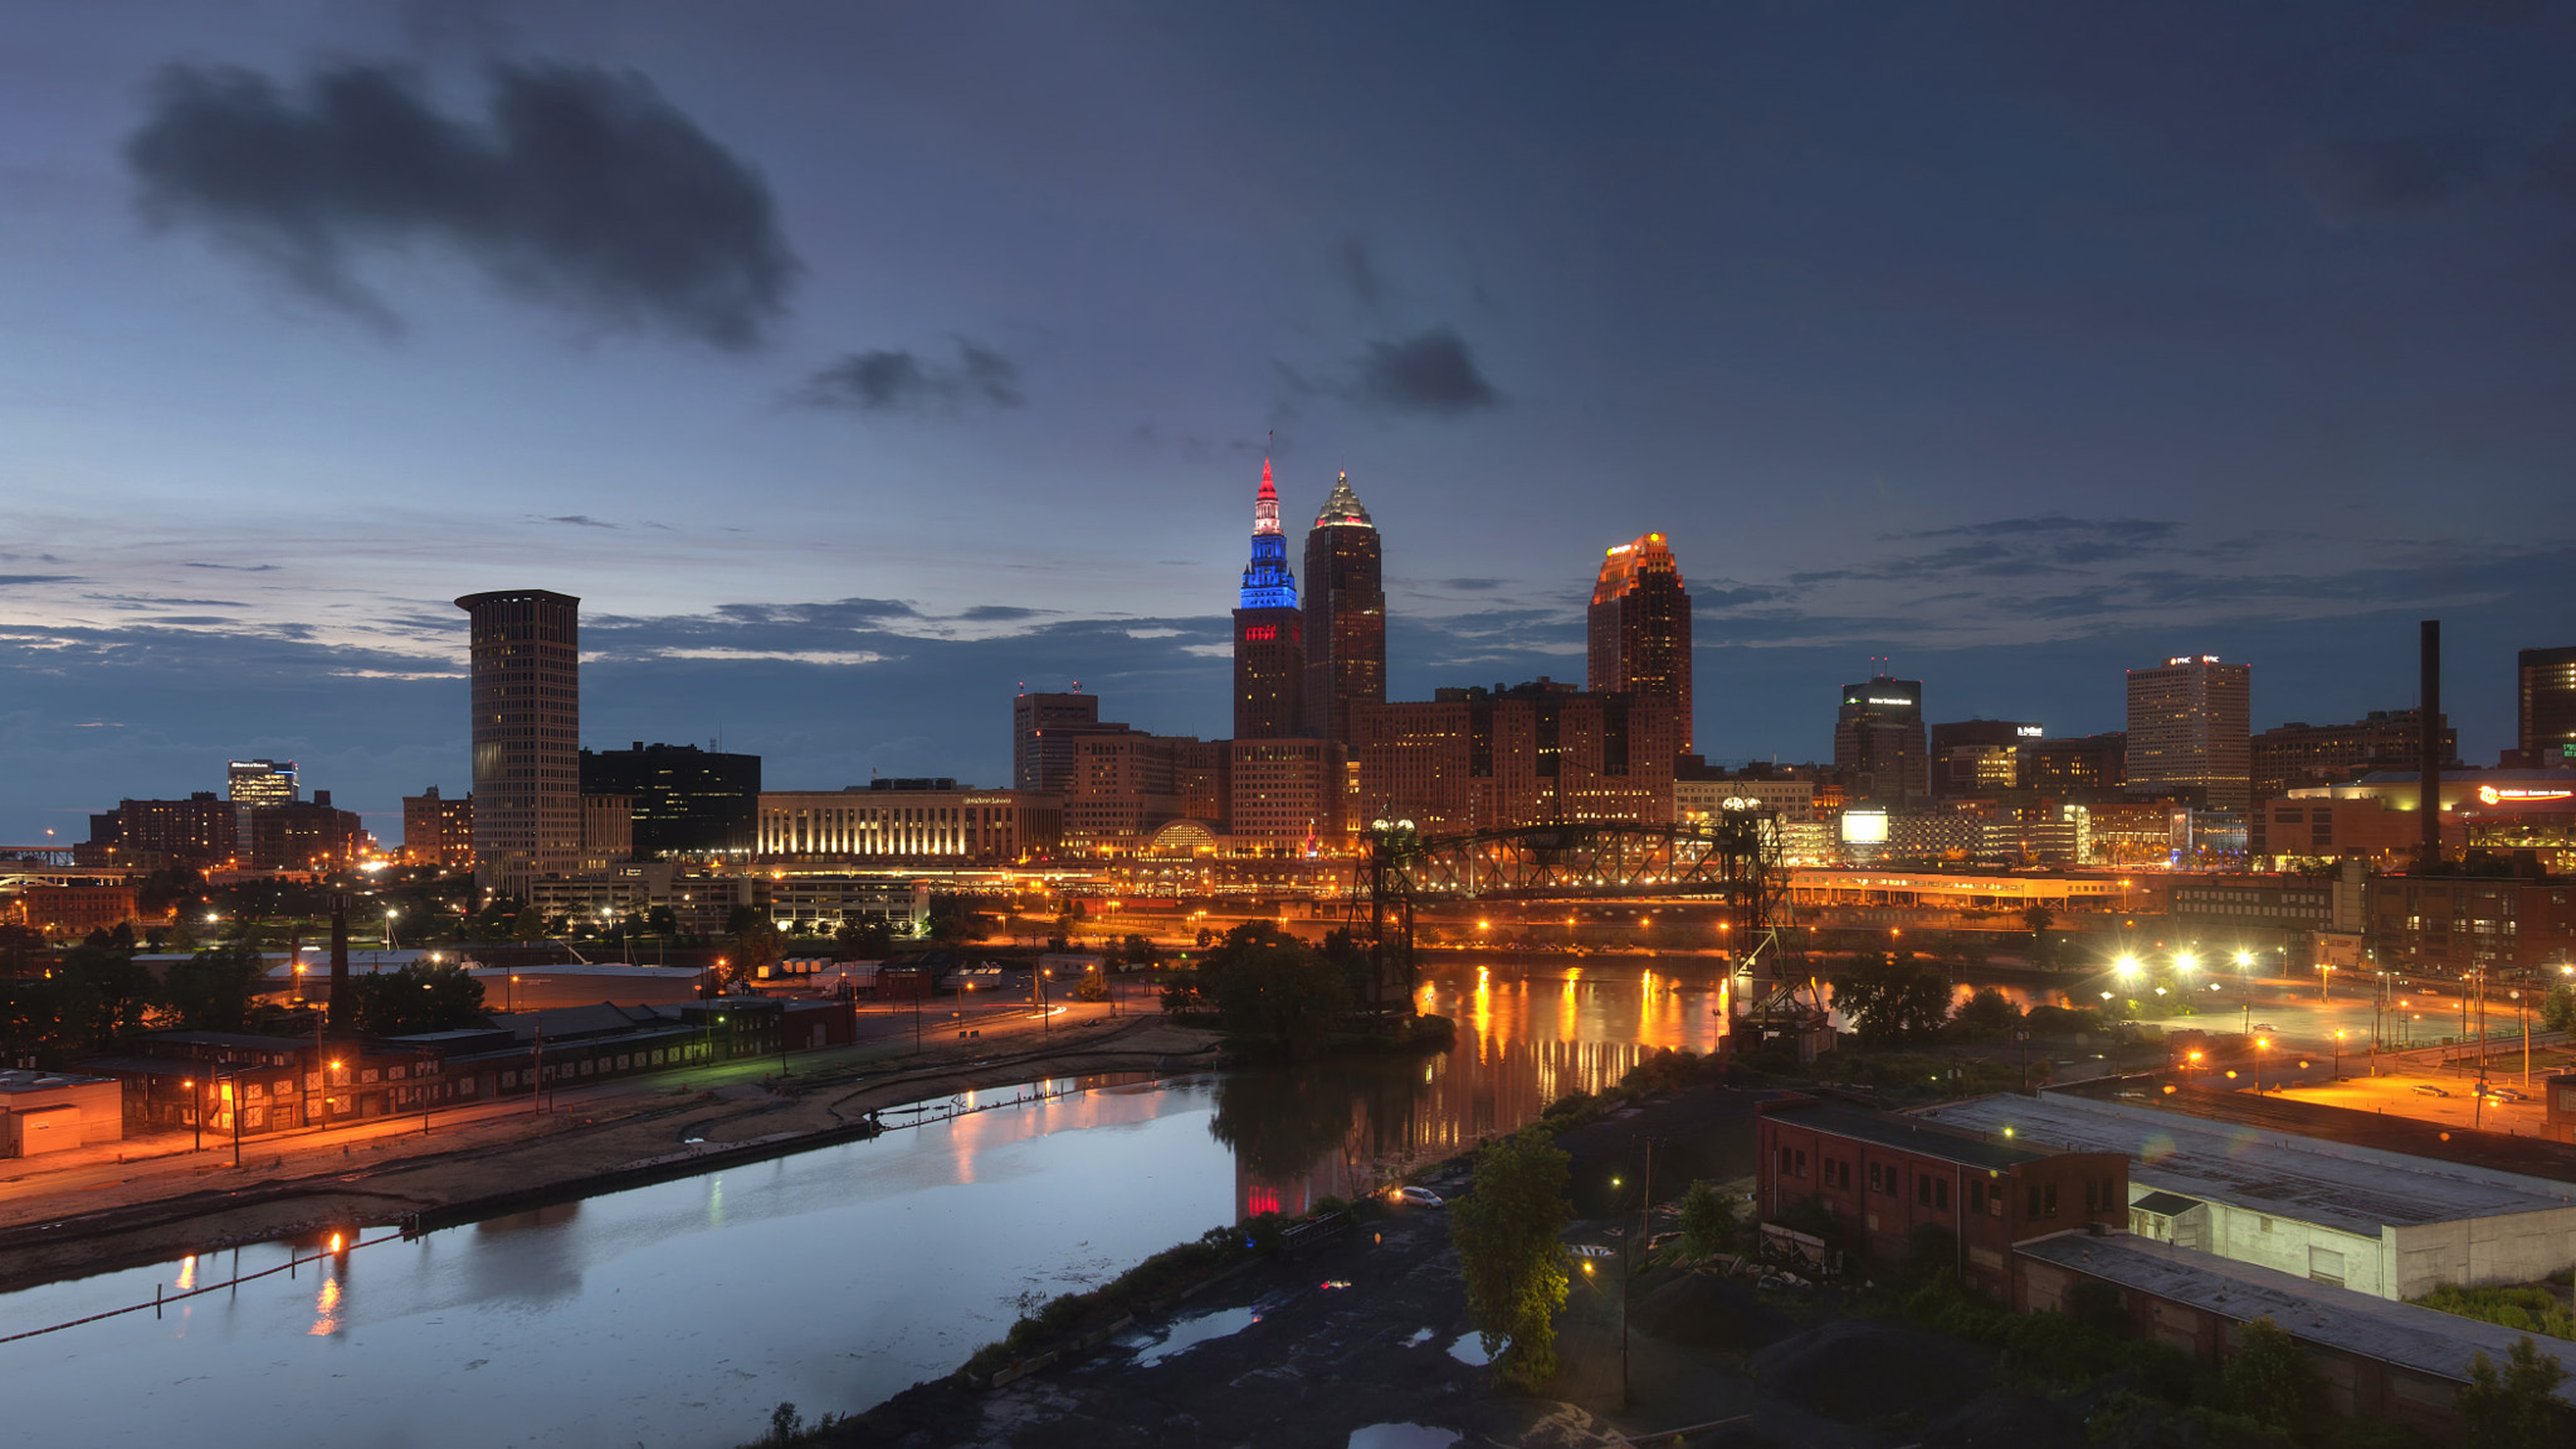 This Is Cleveland City Of Rock Ohio United States Of America Panorama In The Evening HD Desktop Wallpaper For Tablets And Mobile Phones 3840x2160, Wallpaper13.com